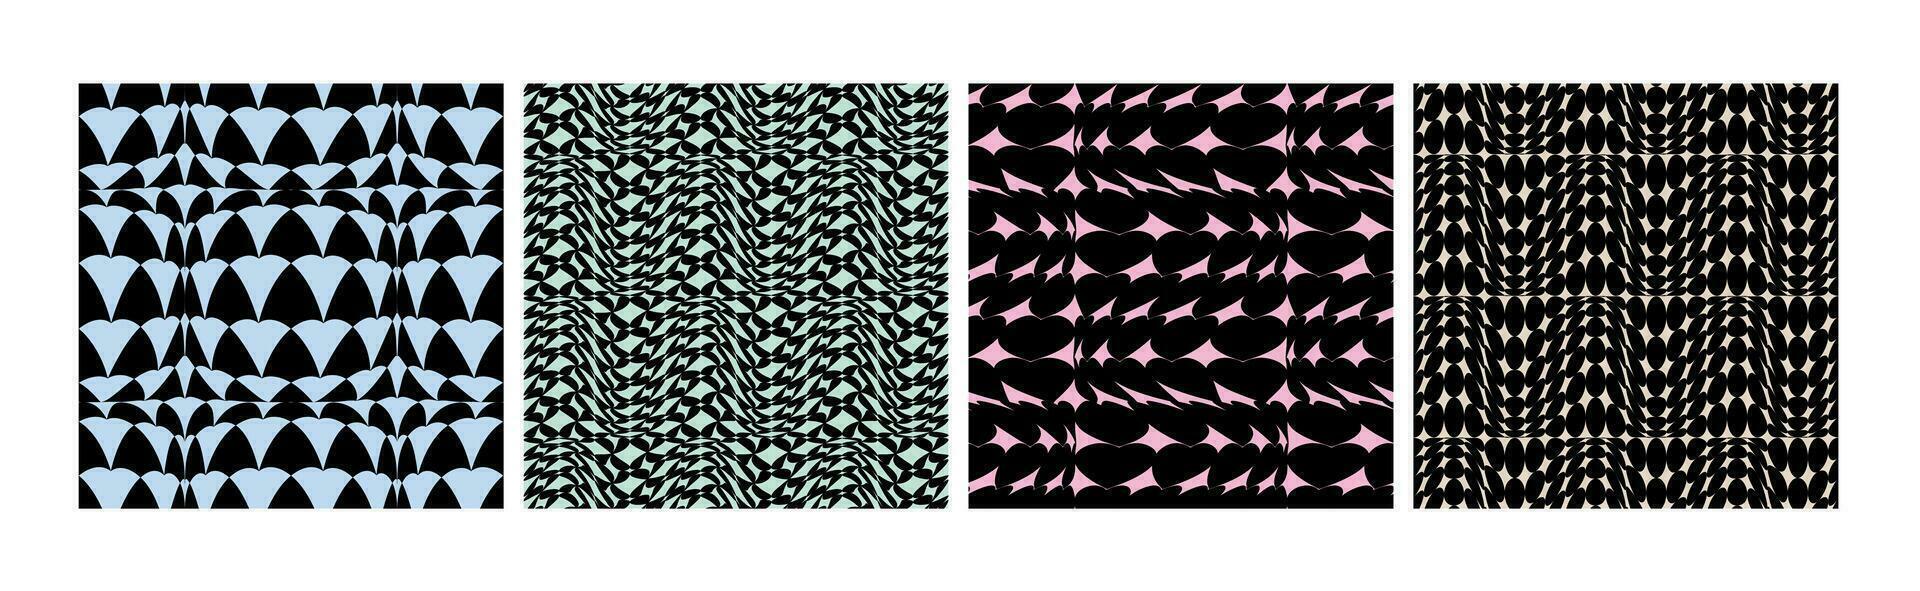 Collection of geometric seamless patterns with abstract shapes. Optical illusion vector background